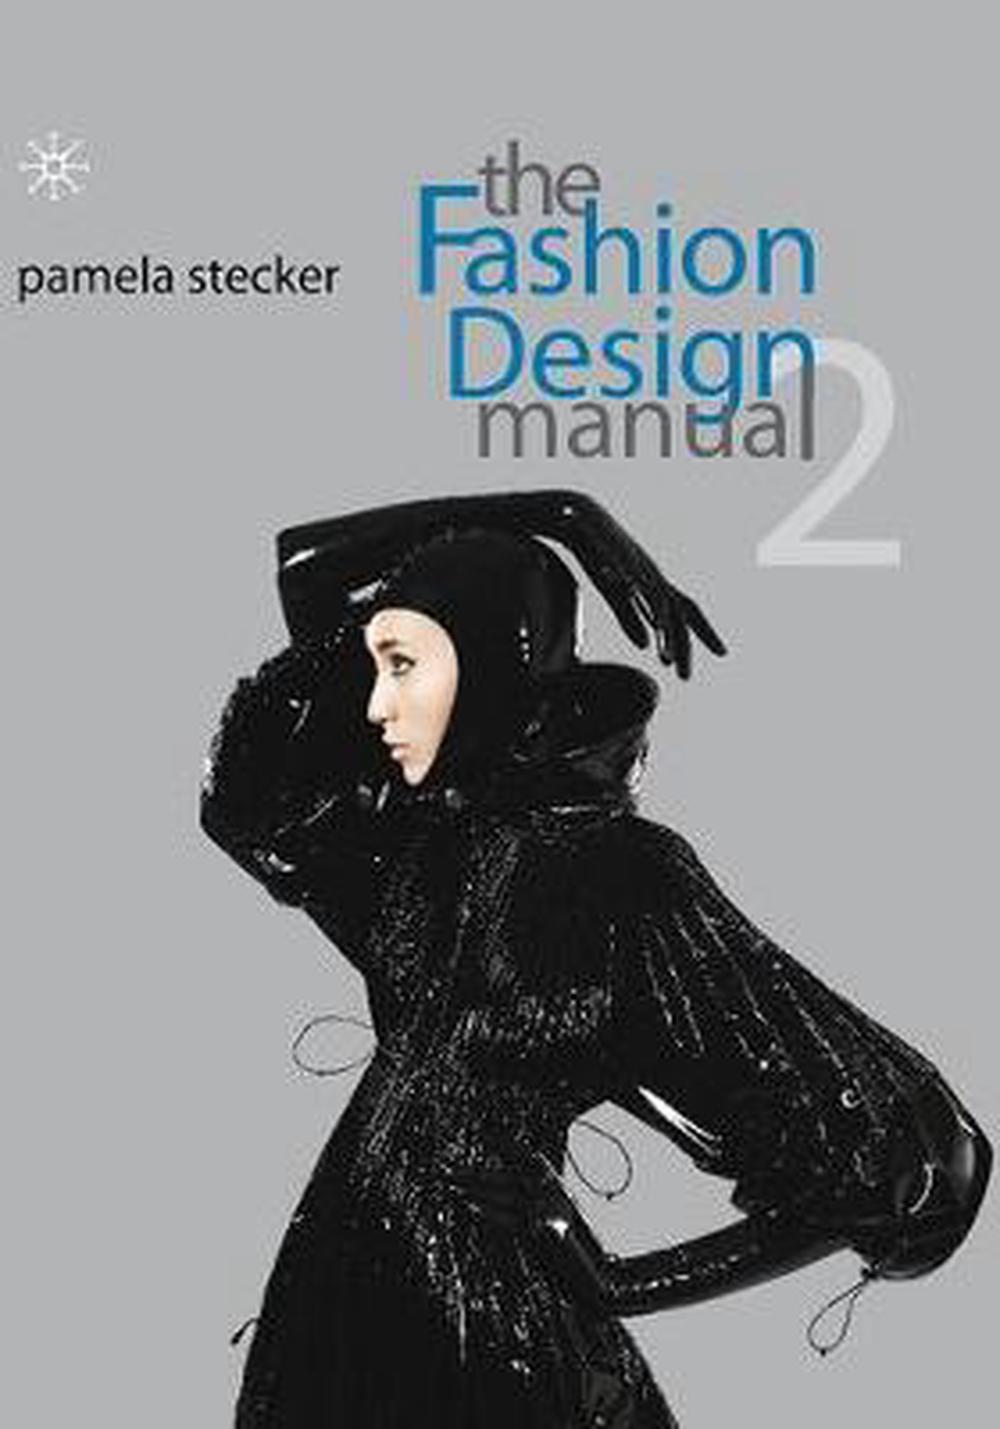 The Fashion Design Manual 2 by Pamela Stecker, Hardcover, 9781420256062 ...